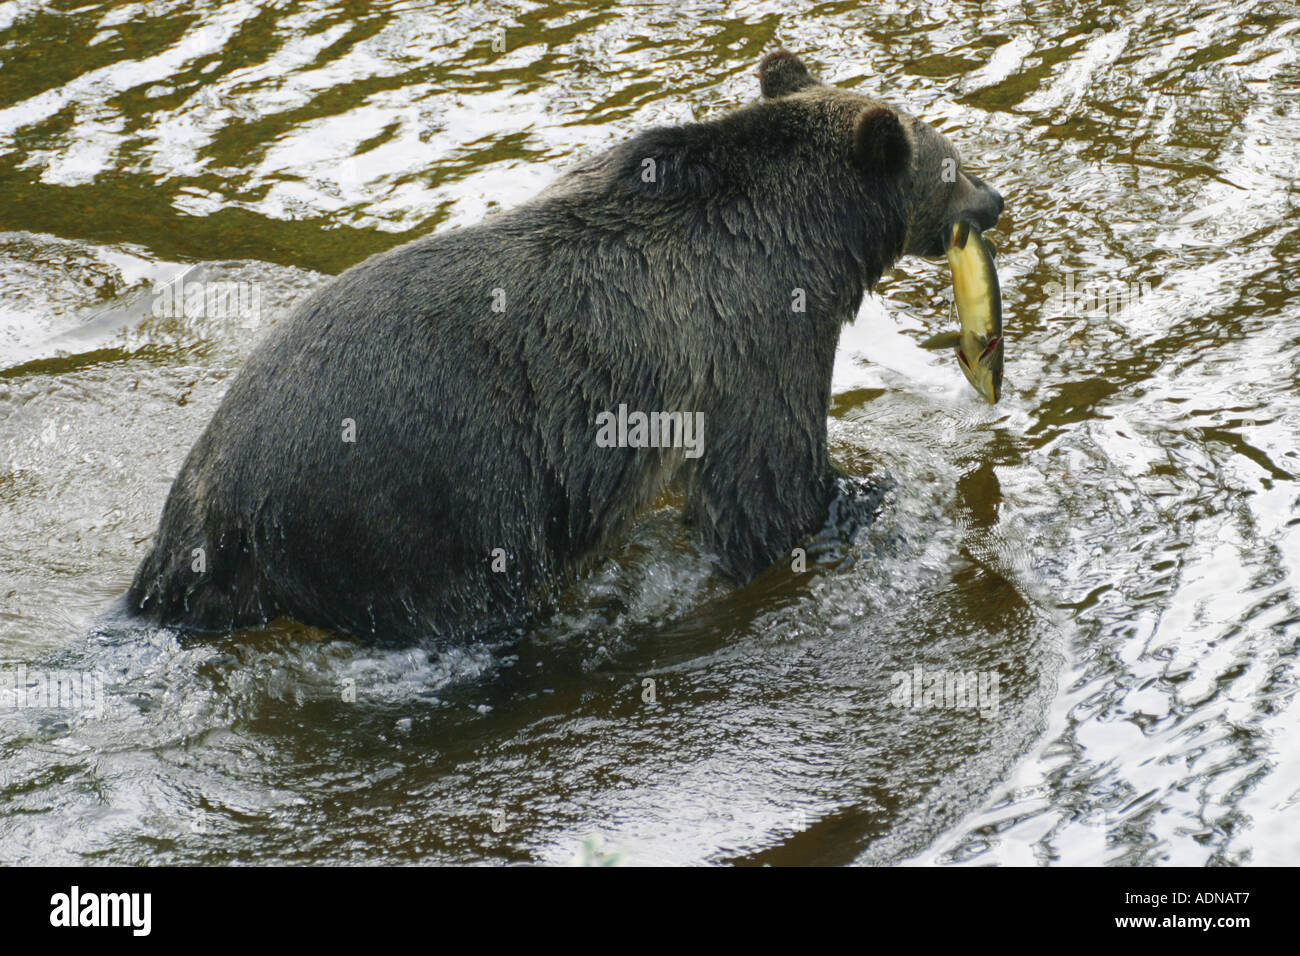 A grizzy bear photographed in the wild A remote area of the Canadian rockies where it is hunting in a river full of salmon Stock Photo